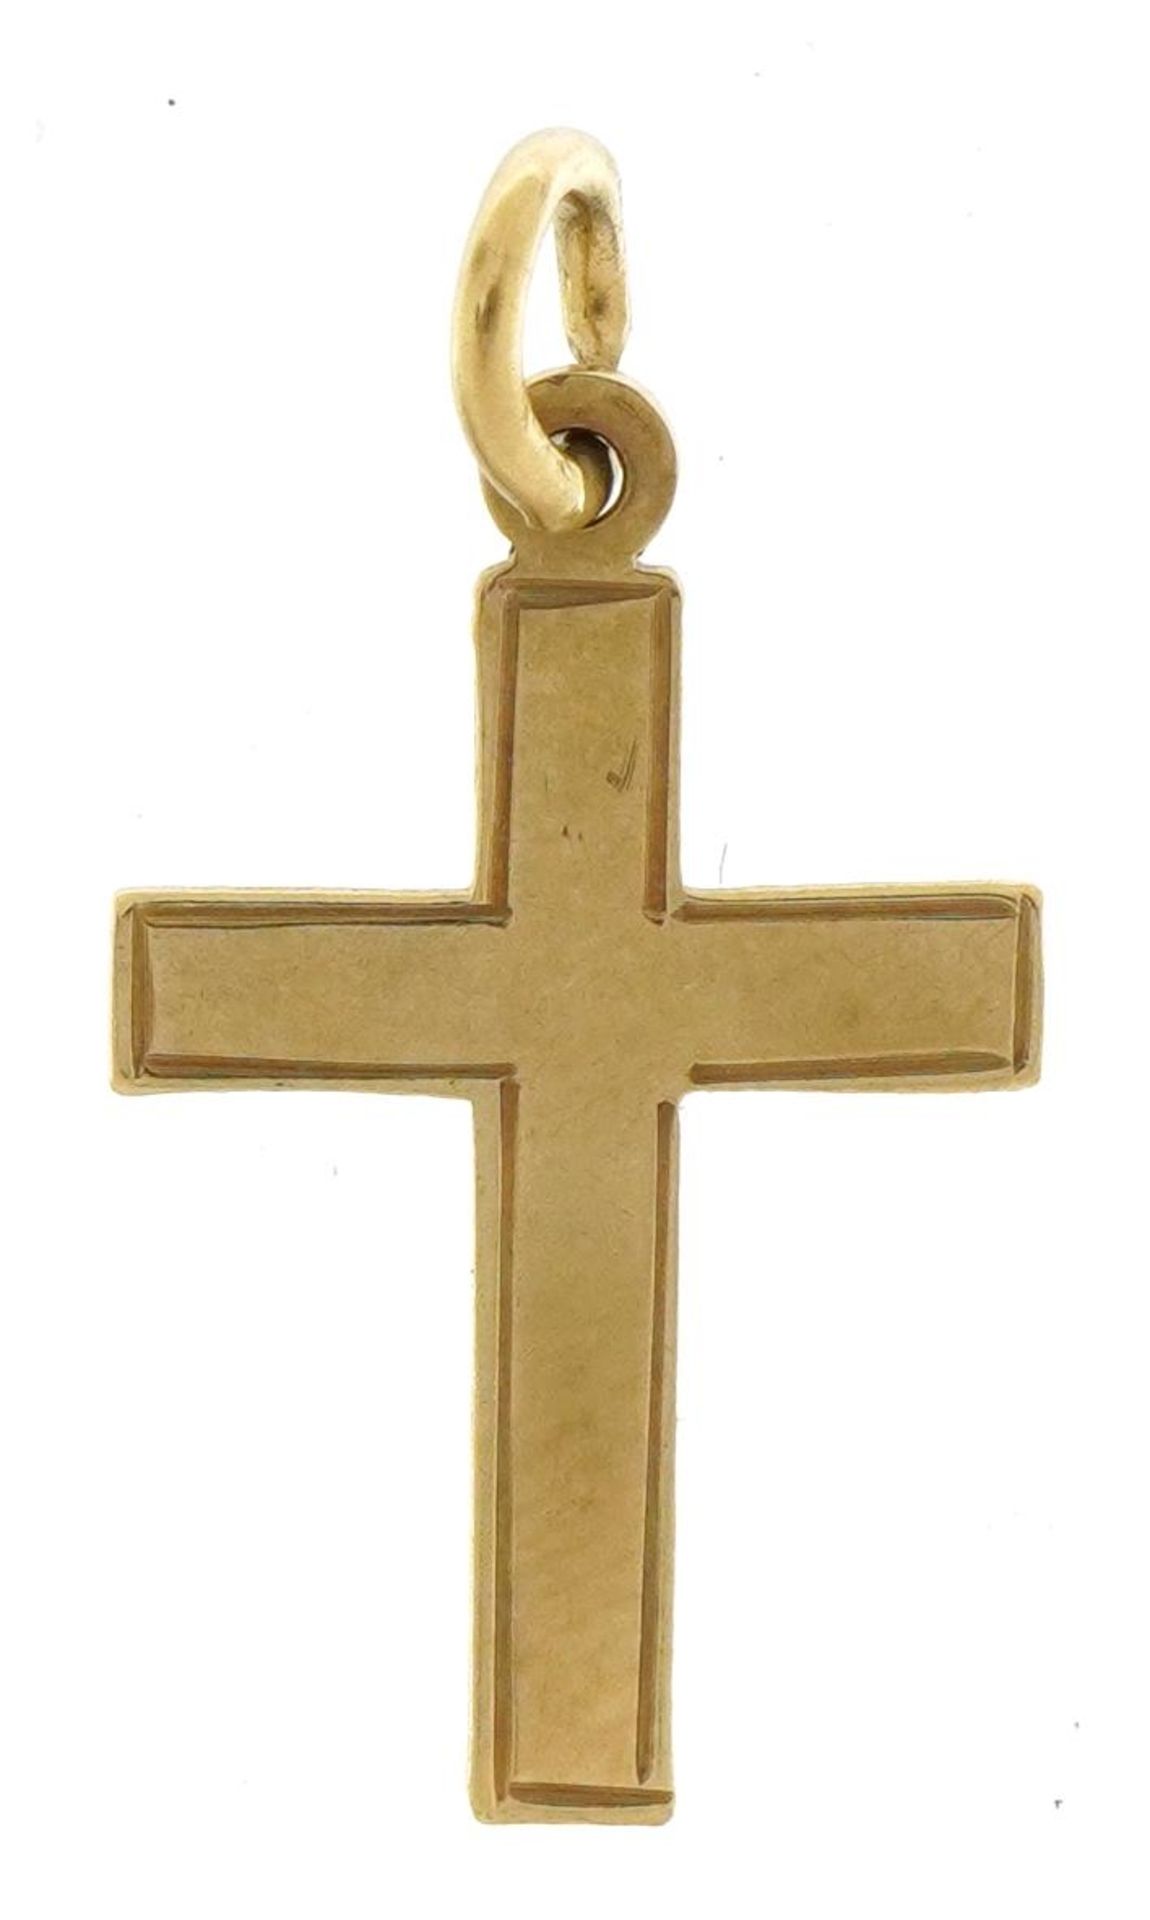 9ct gold cross pendant, 1.8cm high, 0.4g : For further information on this lot please contact the